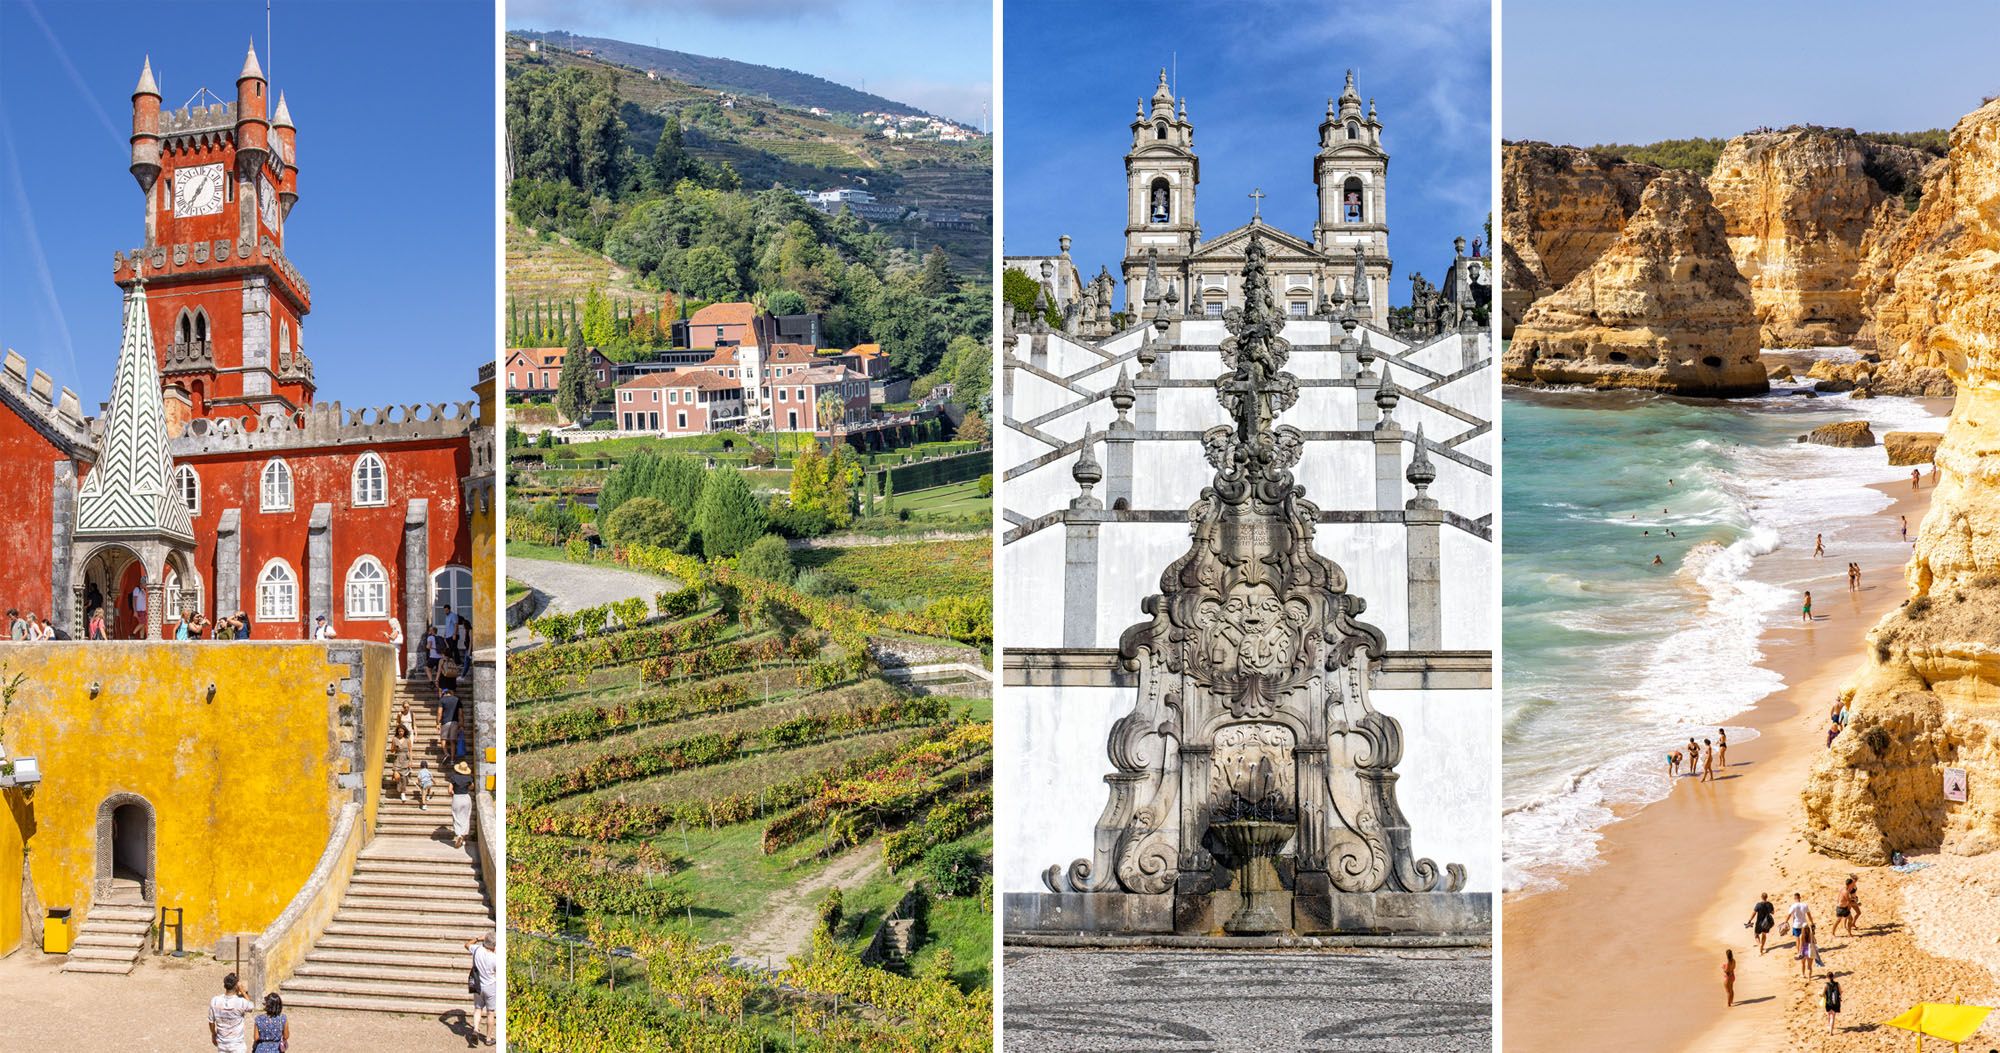 Featured image for “Portugal Bucket List: 25 Amazing Things to Do in Portugal”